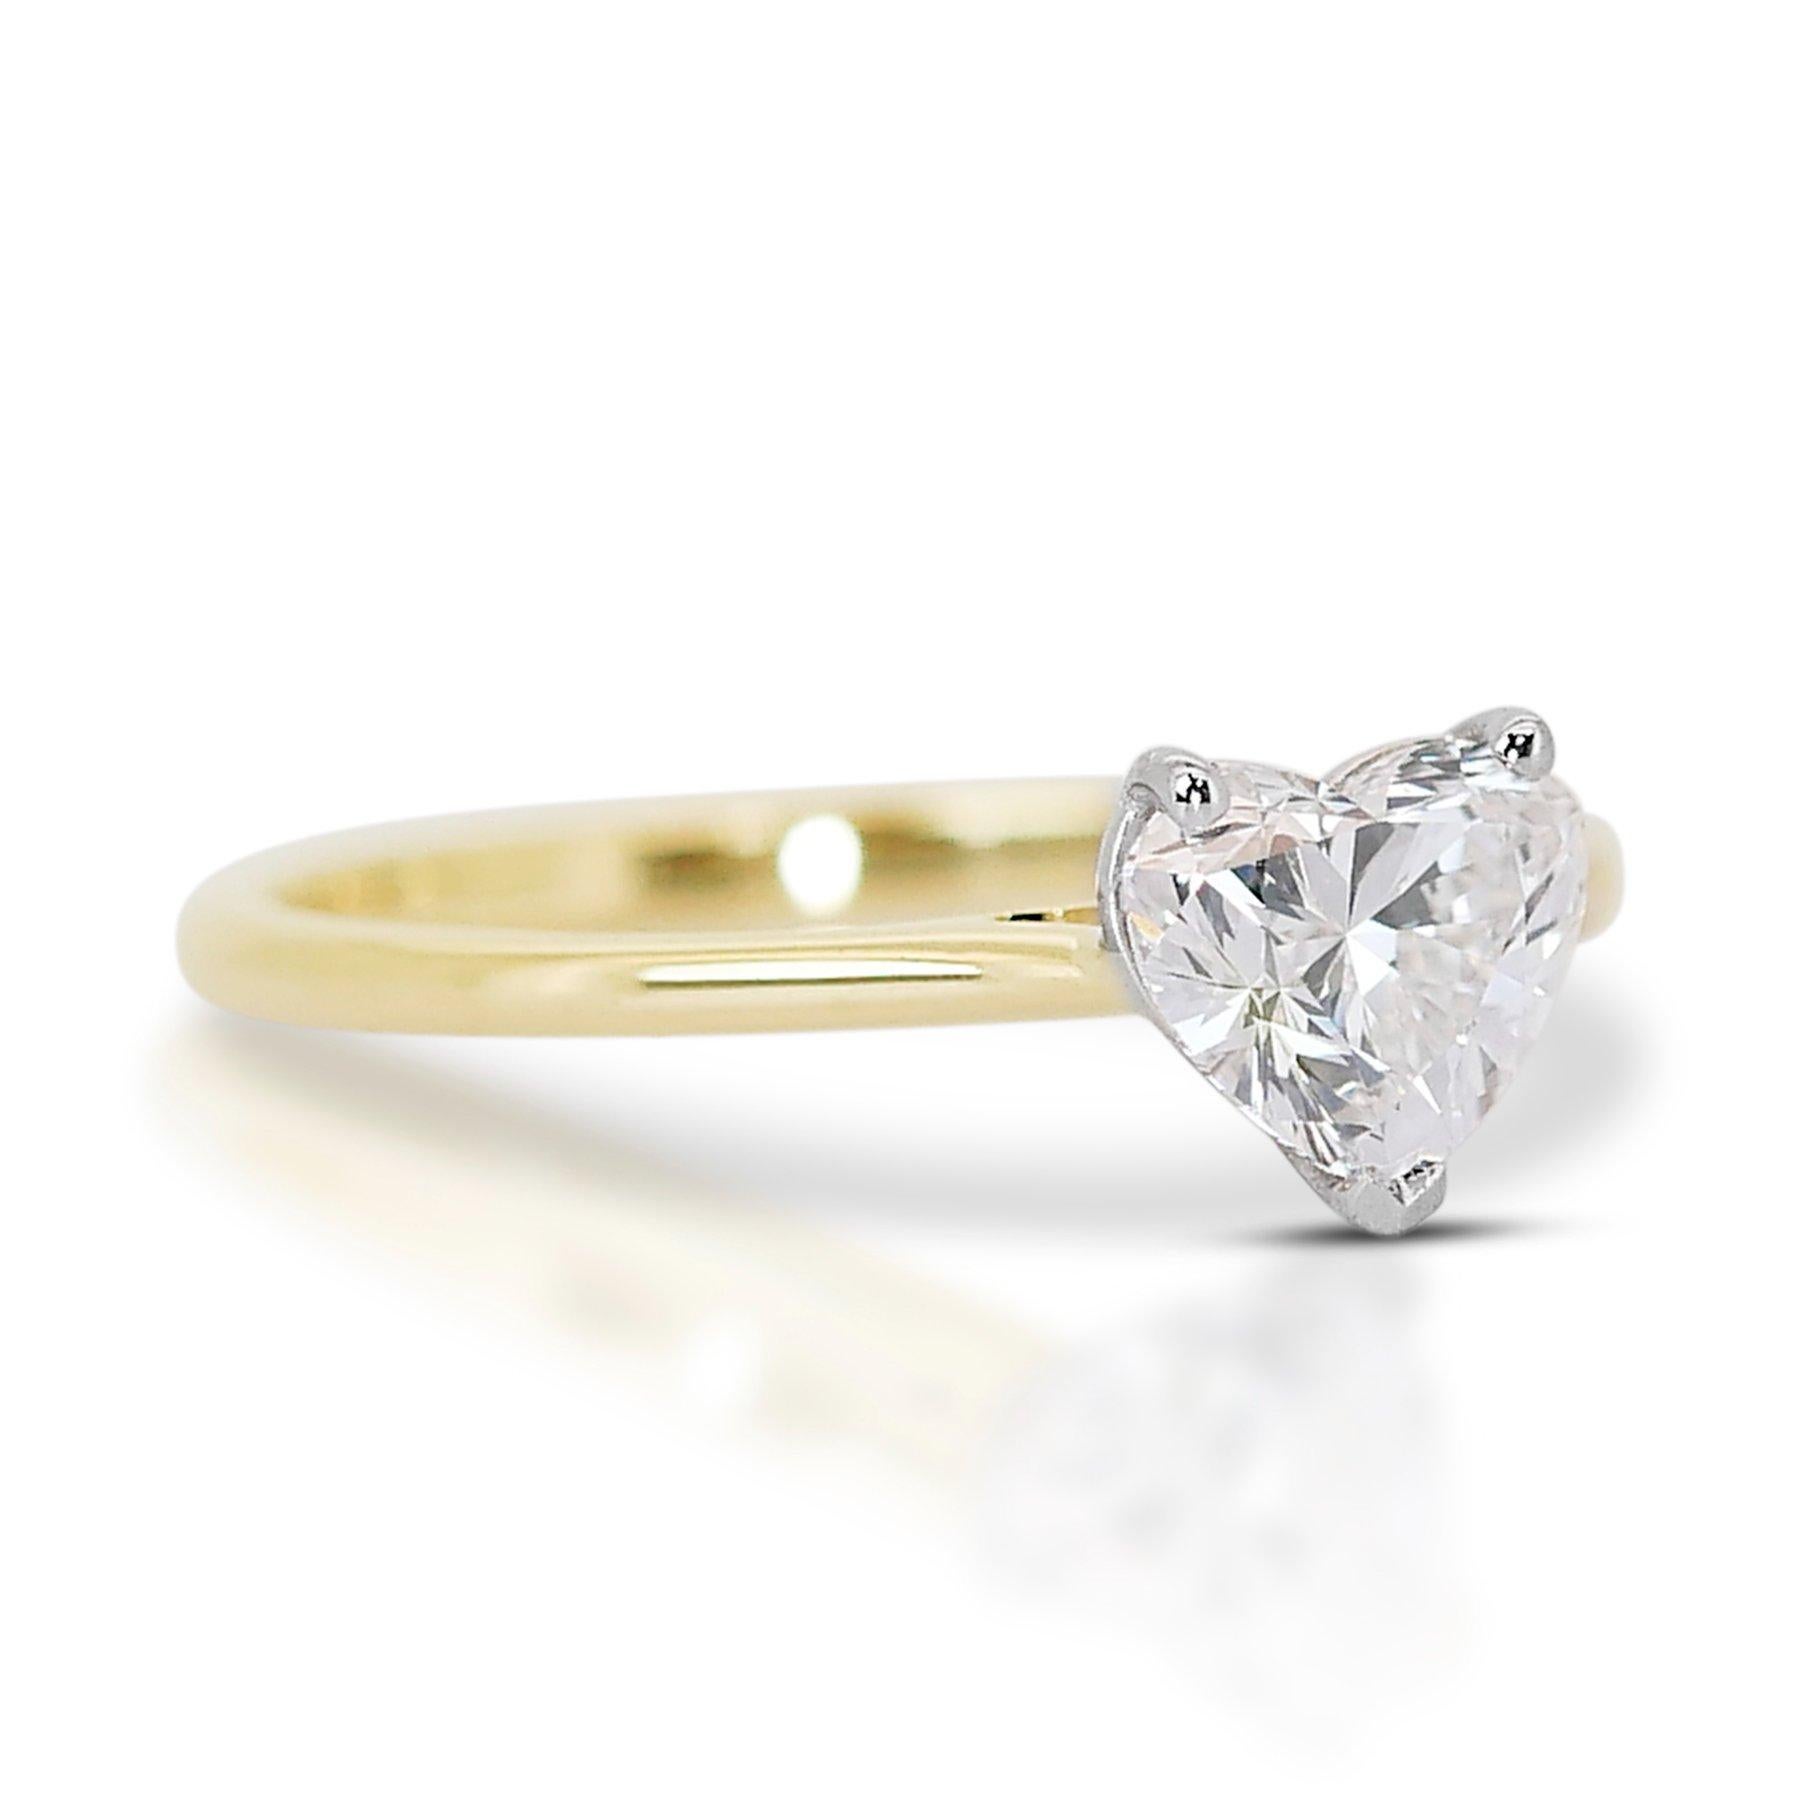 Dazzling 18K Yellow Gold Heart Design Natural Diamond Ring w/1.00ct 

This ring is a captivating symbol of love, featuring a dazzling 1.00 carat natural diamond in a romantic heart shape. The ring is crafted from luxurious 18K yellow gold, adding a